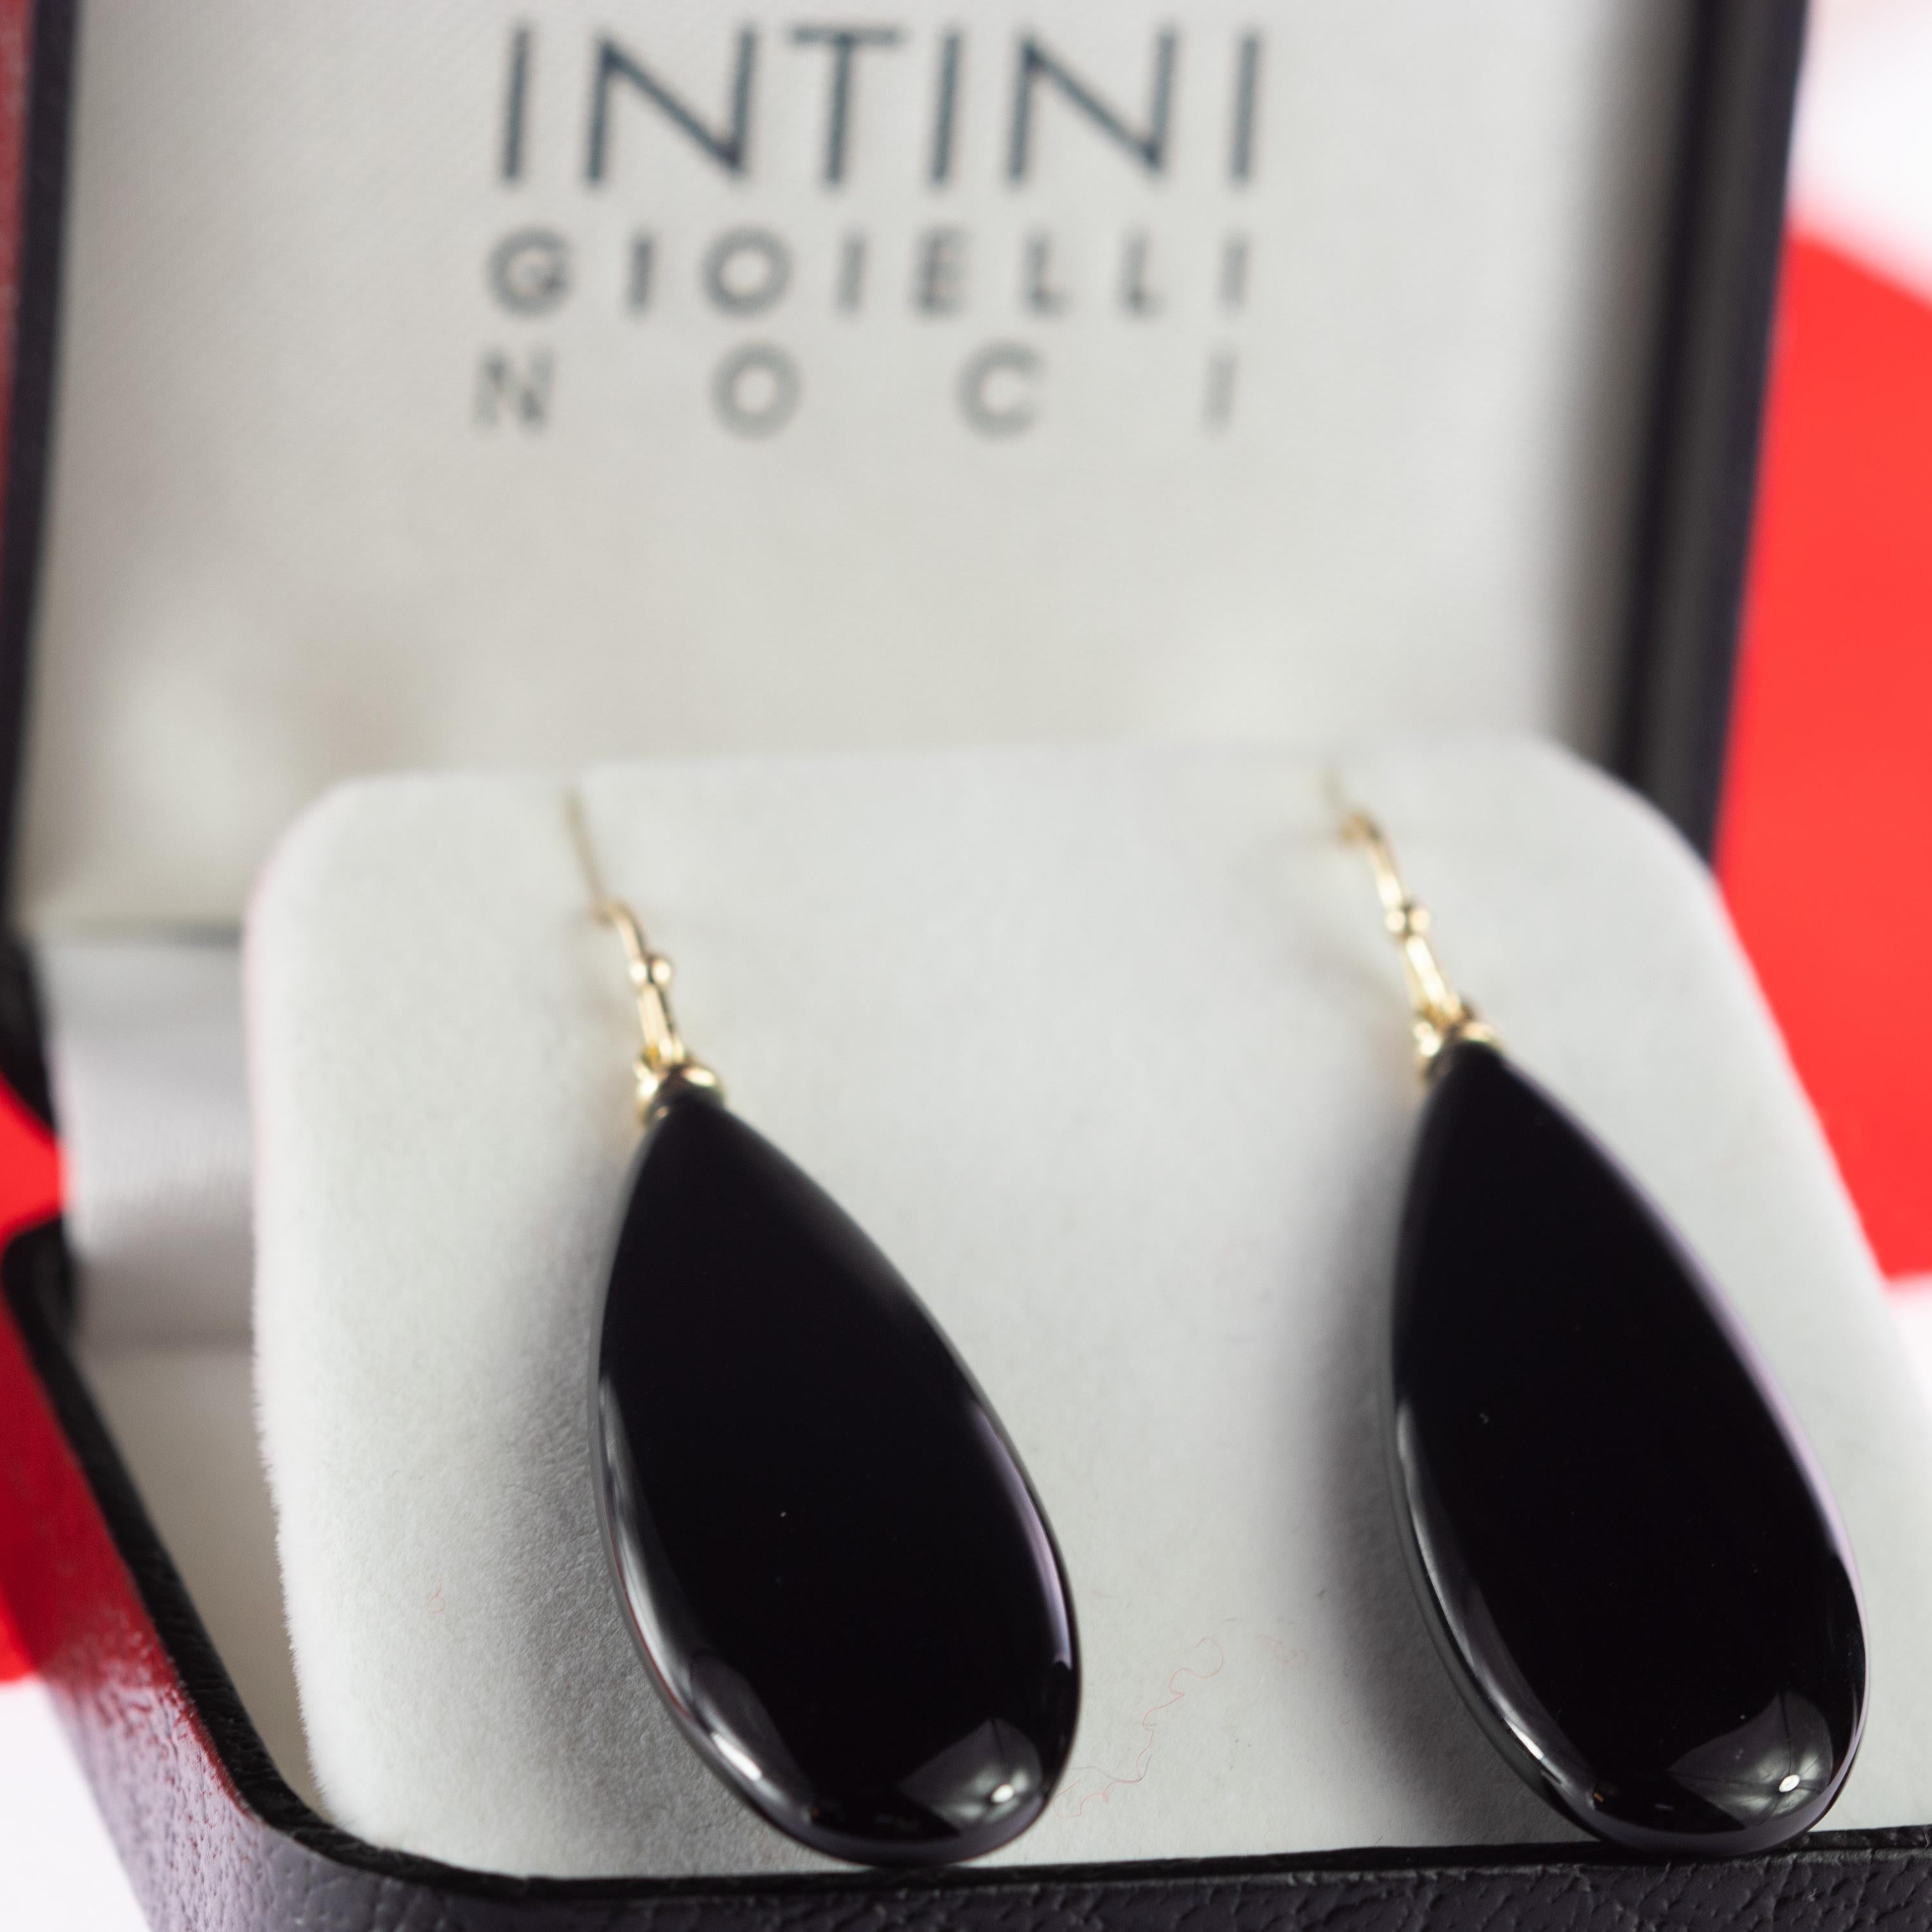 This stunning masterpiece with high quality craftsmanship was born in the Intini Jewels workshop. Our designers add all the italian modern style and glamour in one exquisite piece. Stunning crafted black brilliant Agate cocktail flat teardrop with